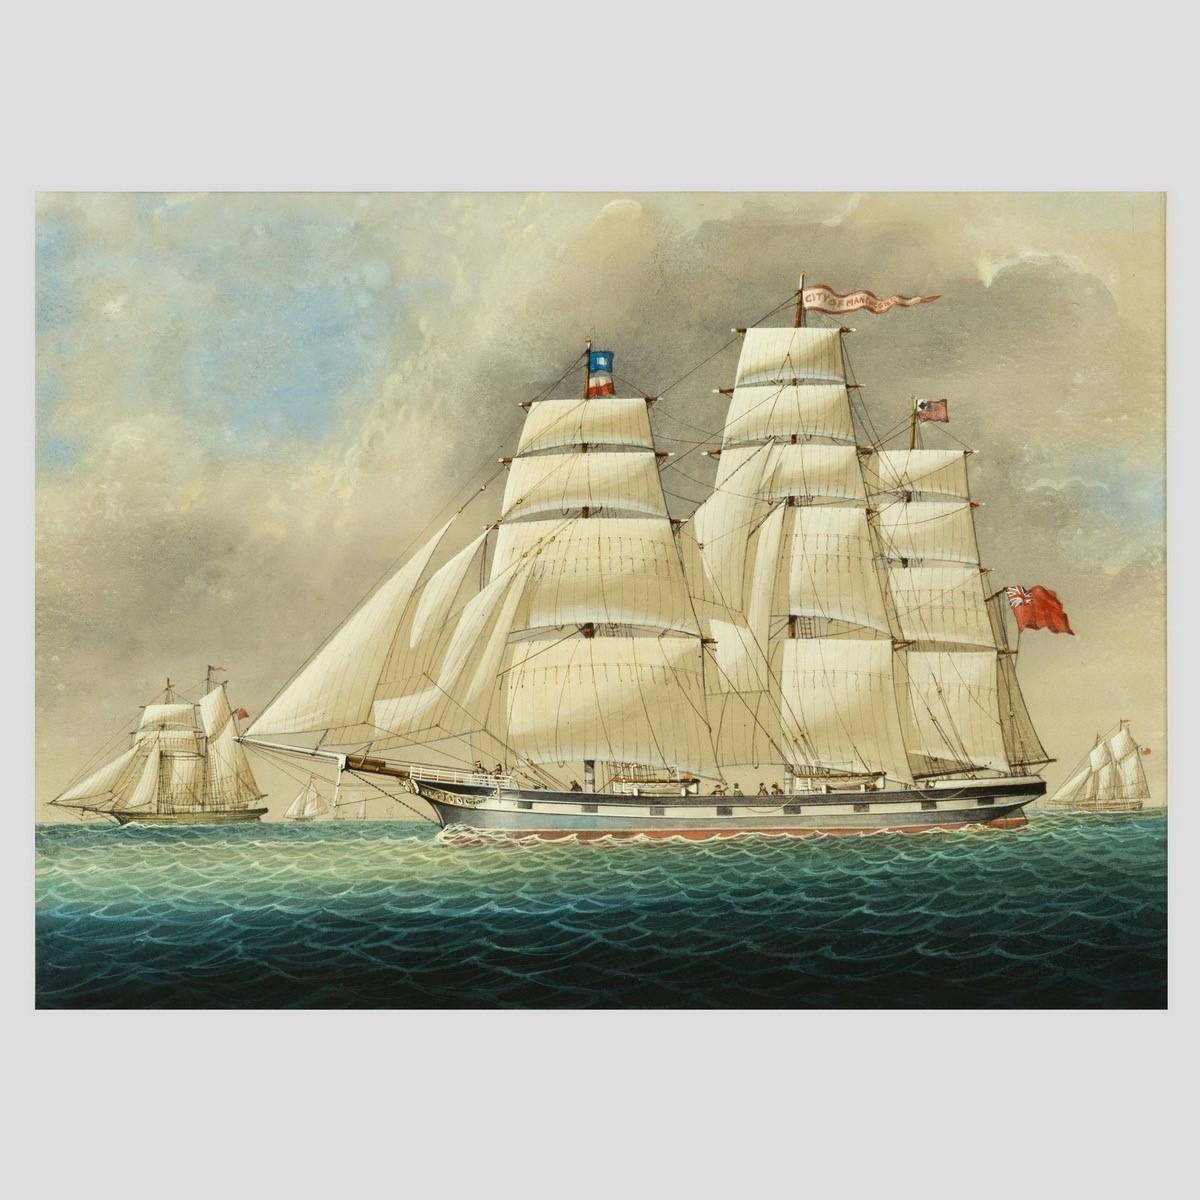 A fine 19th century watercolor of the three masted sailing ships The SS City of Manchester.
Taken from Wikipedia, The SS City of Manchester was an iron-hulled single screw liner built 1851 by Tod & McGregor, Glasgow, Scotland and the second such